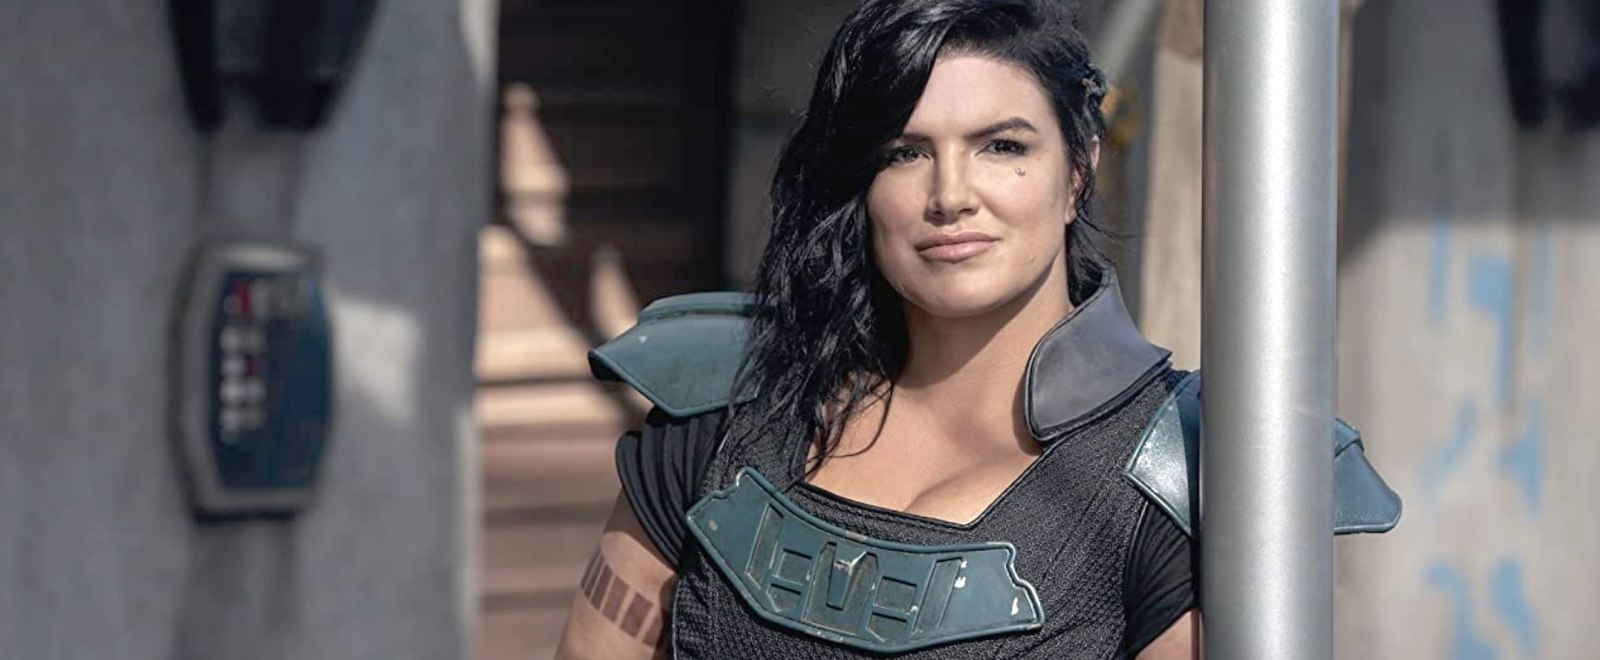 Gina Carano Discovered She Was Fired From ‘The Mandalorian’ At The Same Time As Everyone Else